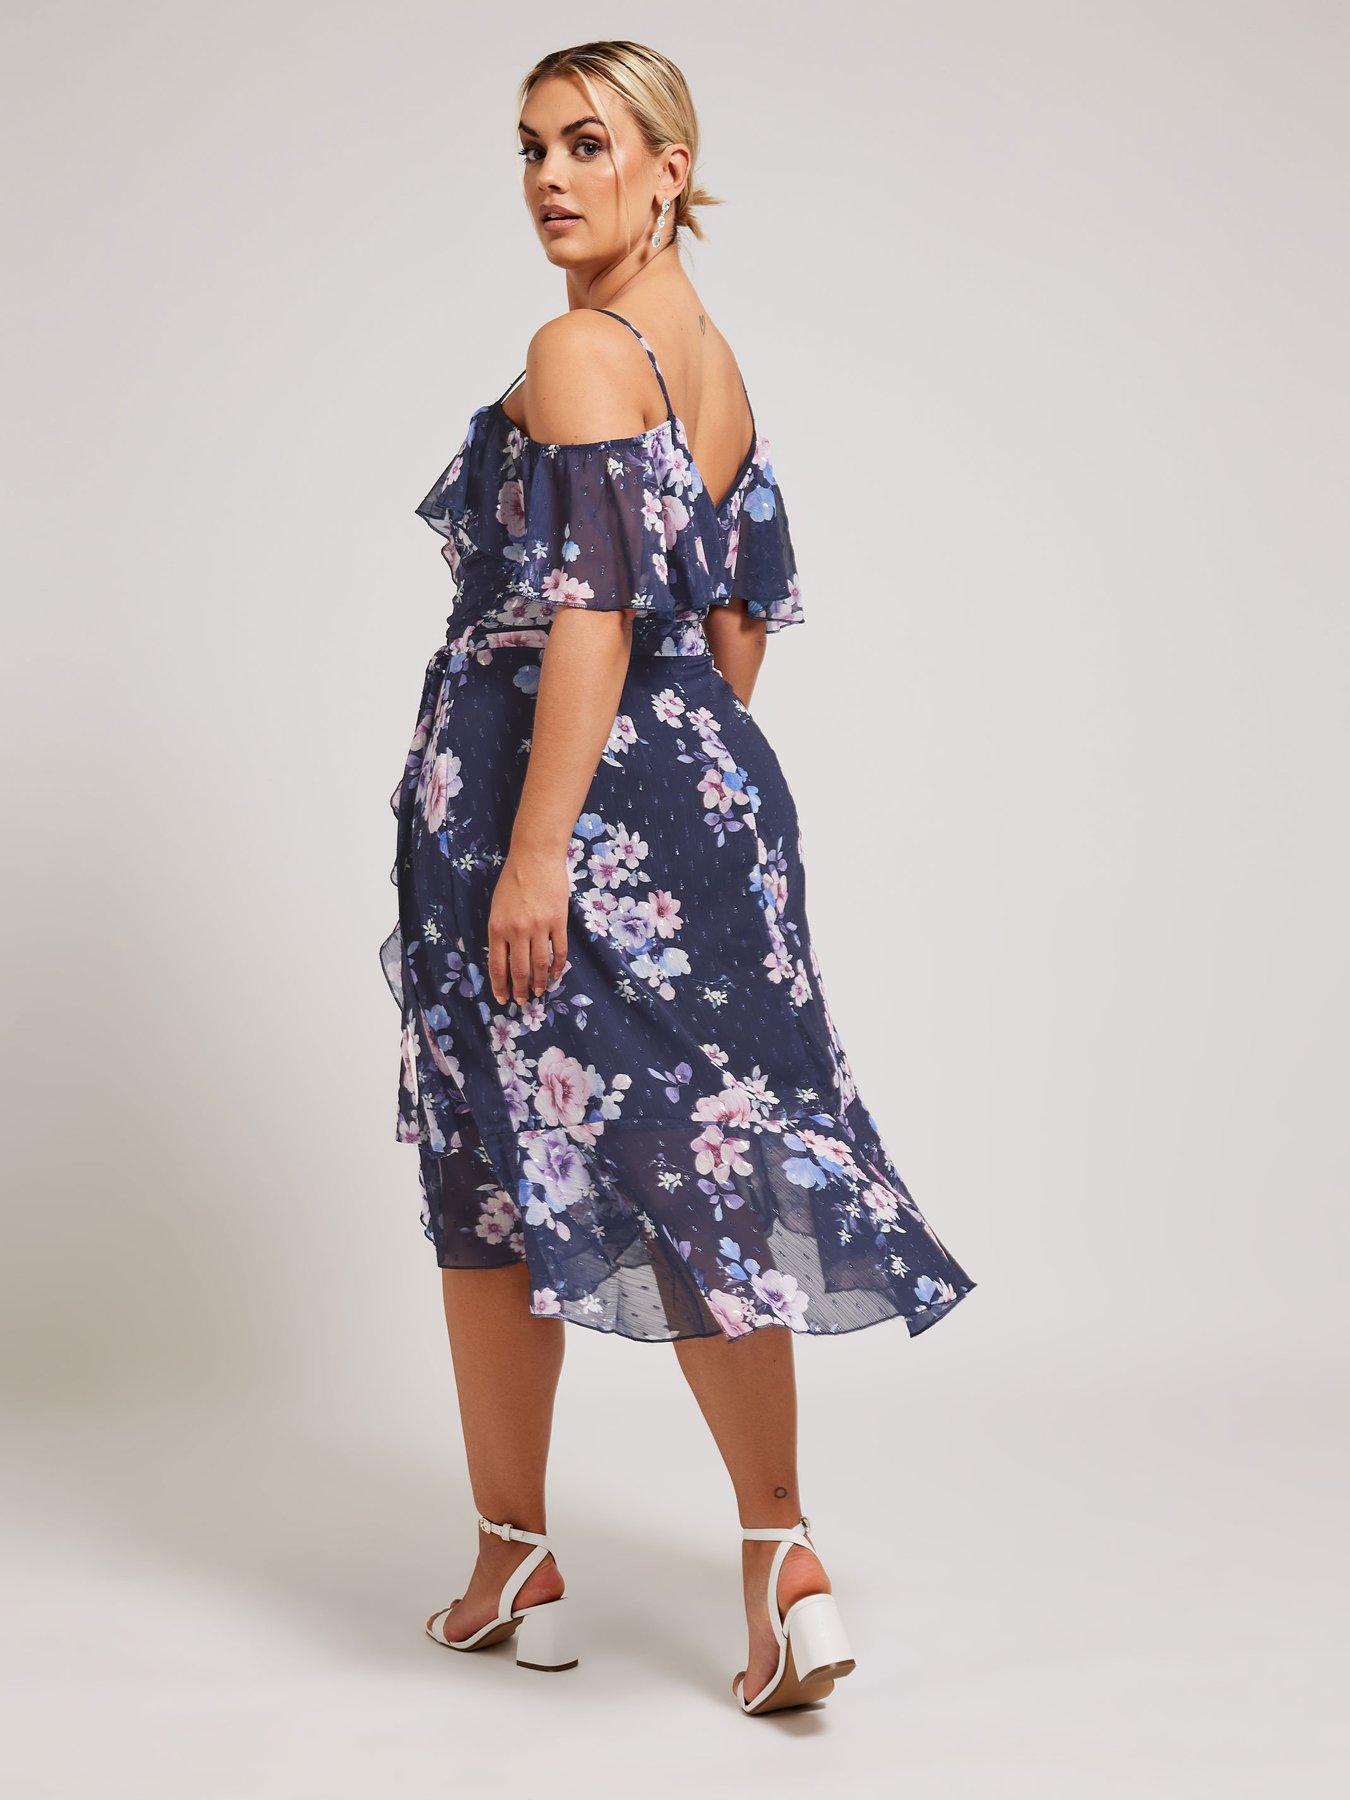 Yours Curve Floral Cold Shoulder Metallic Dobby Wrap Dress | Very.co.uk